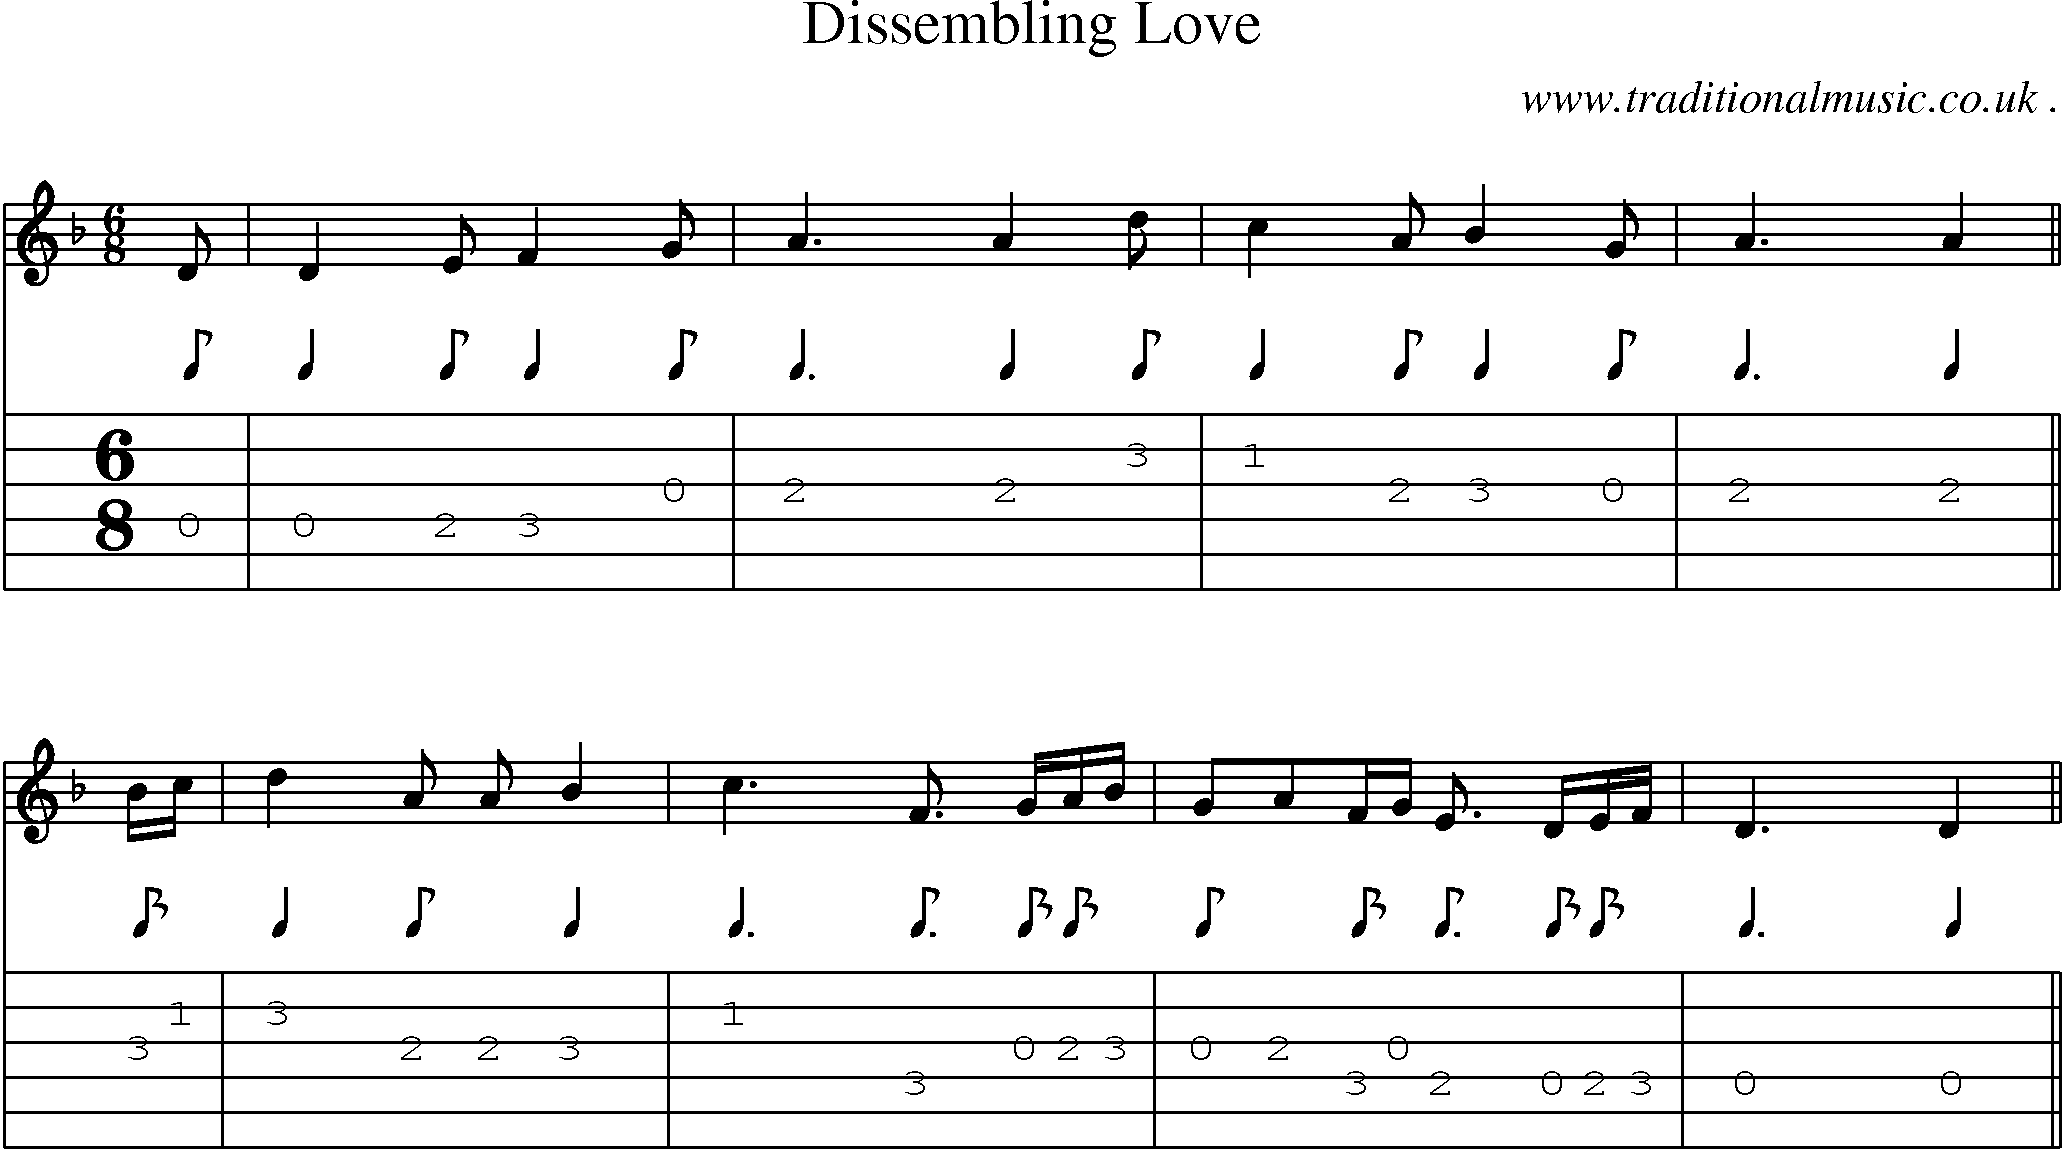 Sheet-music  score, Chords and Guitar Tabs for Dissembling Love